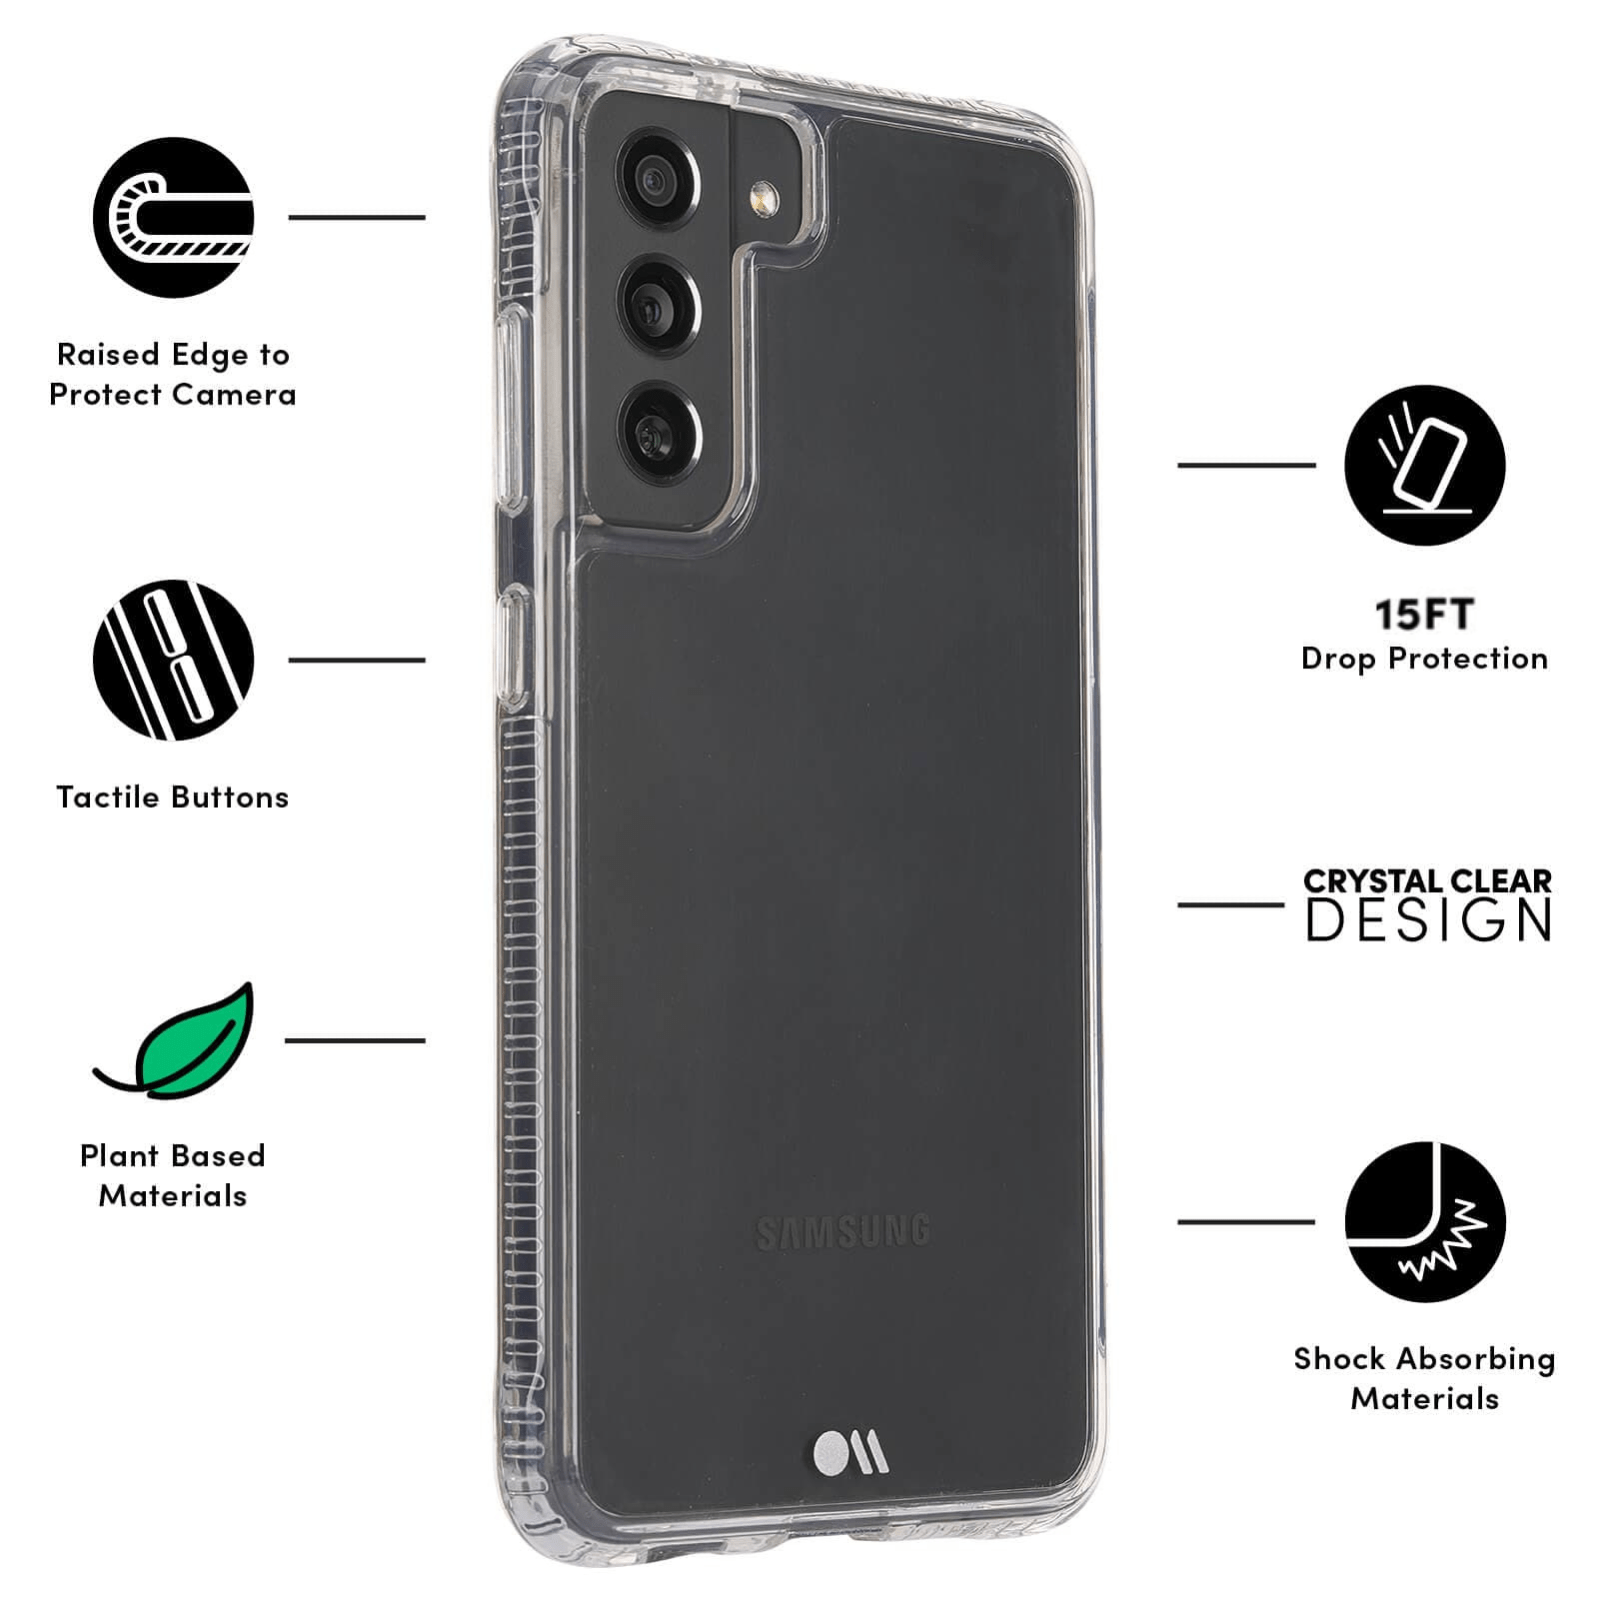 FEATURES: RAISED EDGE TO PROTECT CAMERA, TACTILE BUTTONS, PLANT BASED MATERIALS, 10FT DROP PROTECTION, CRYSTAL CLEAR DESIGN, SHOCK ABSORBING MATERIALS. COLOR::CLEAR